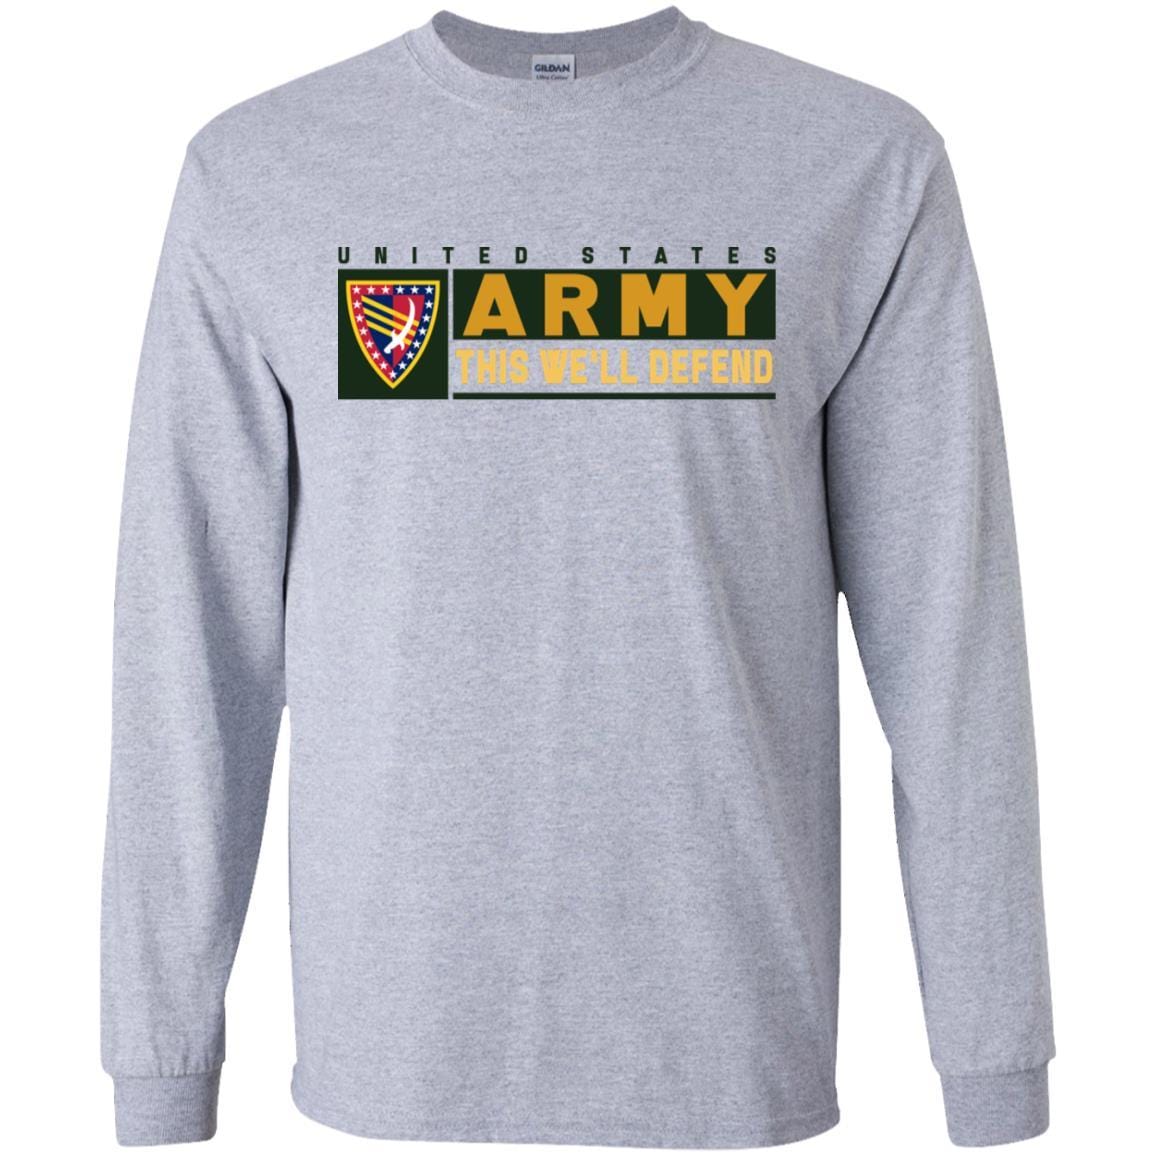 US Army 38 SUSTAINMENT BRIGADE- This We'll Defend T-Shirt On Front For Men-TShirt-Army-Veterans Nation